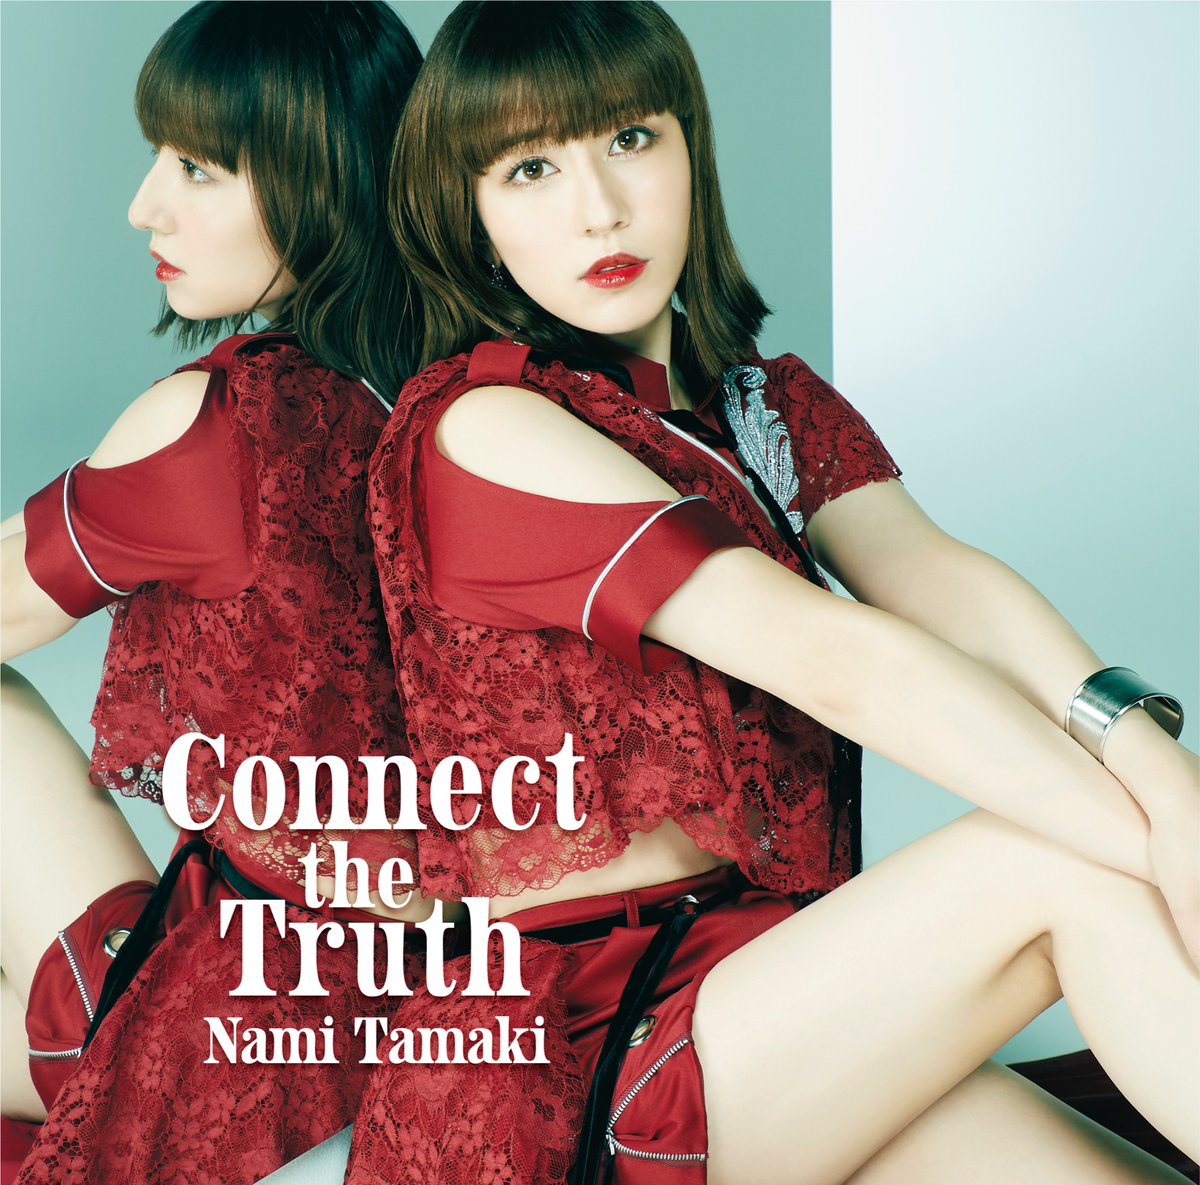 Cover art for『Nami Tamaki - Connect the Truth』from the release『Connect the Truth